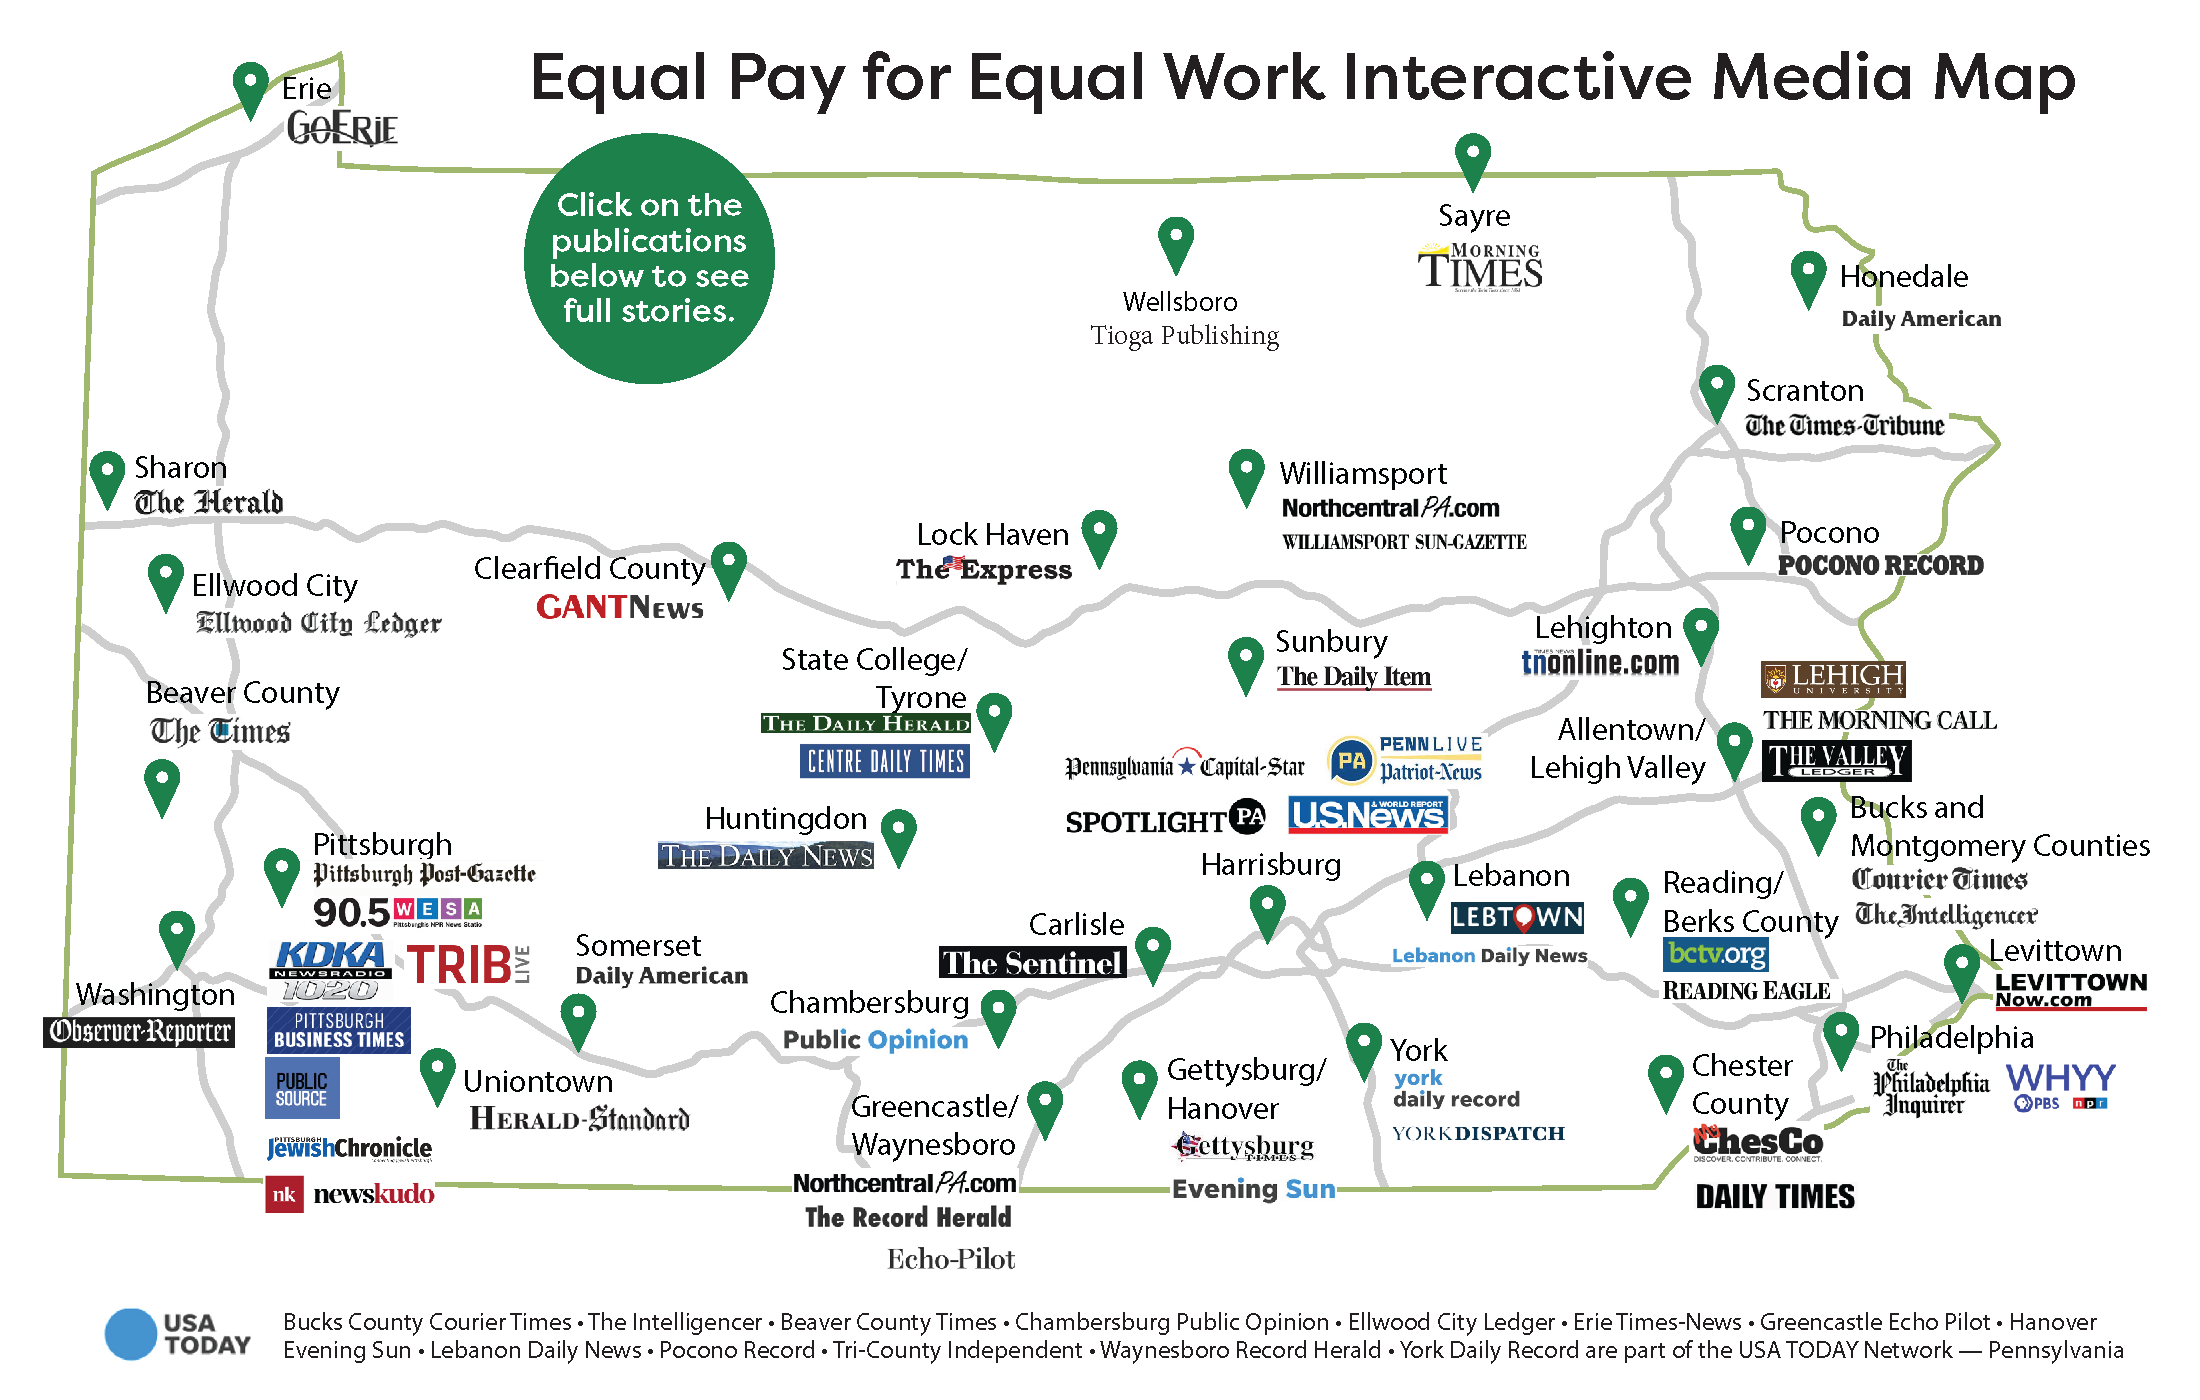 Equal Pay for Equal Work Media Map